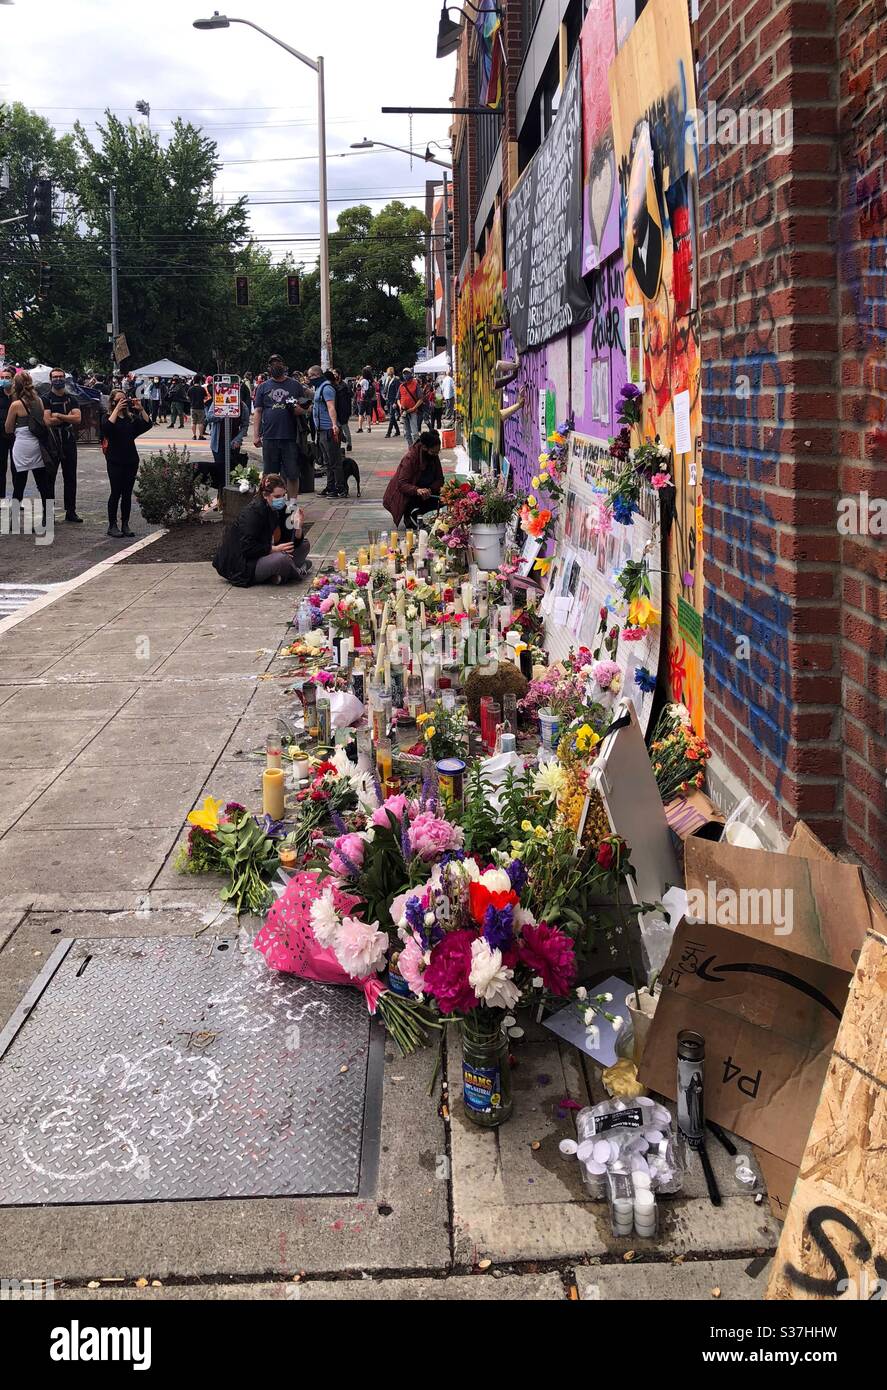 Flowers and candles at makeshift George Floyd memorial wall in CHOP CHAZ autonomous zone on Capitol Hill in Seattle, june 2020 Stock Photo